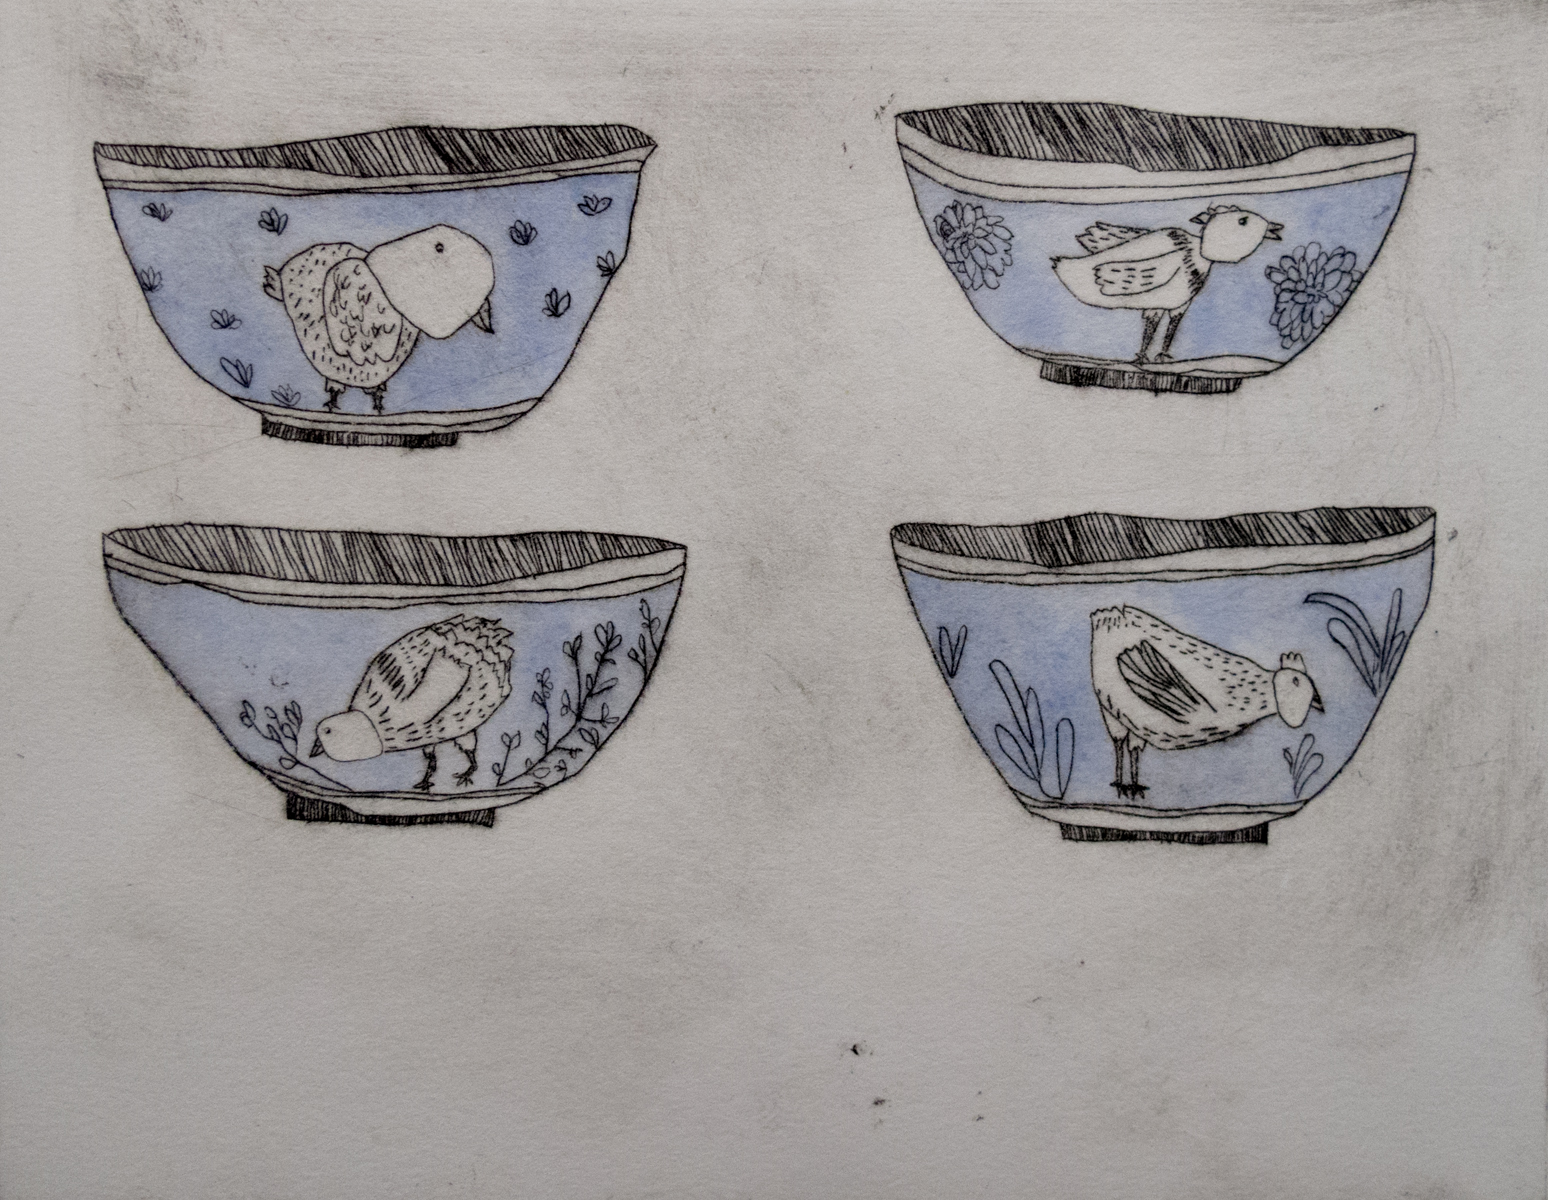  Jane Carlson   Chicken Cups   Drypoint with watercolor 